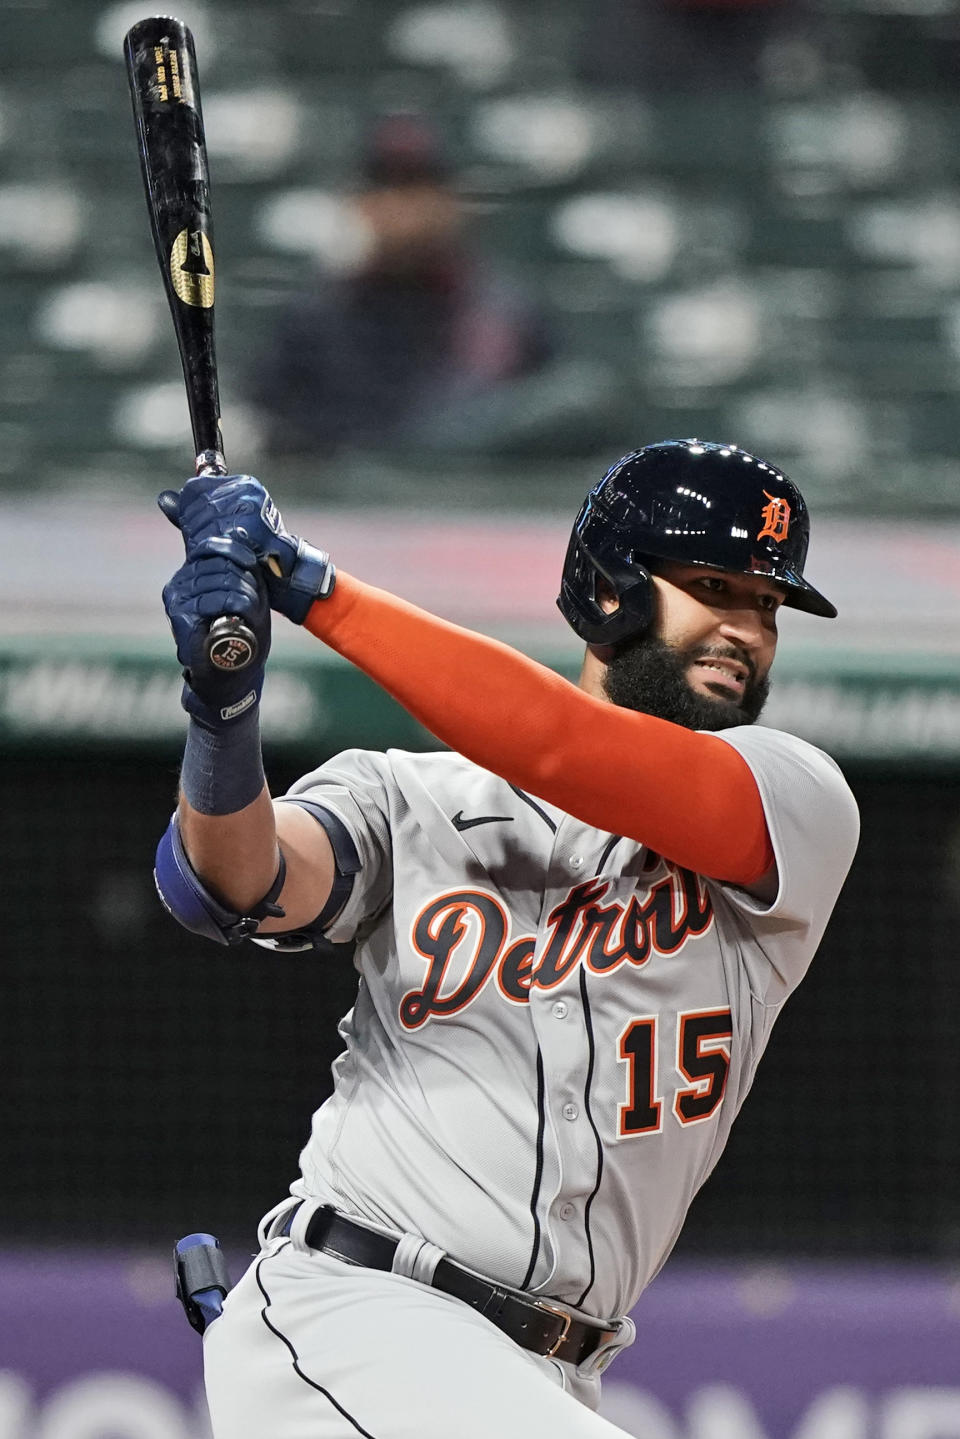 Detroit Tigers' Nomar Mazara strikes out swinging in the ninth inning of the team's baseball game against the Cleveland Indians, Friday, April 9, 2021, in Cleveland. The Indians won 4-1. (AP Photo/Tony Dejak)